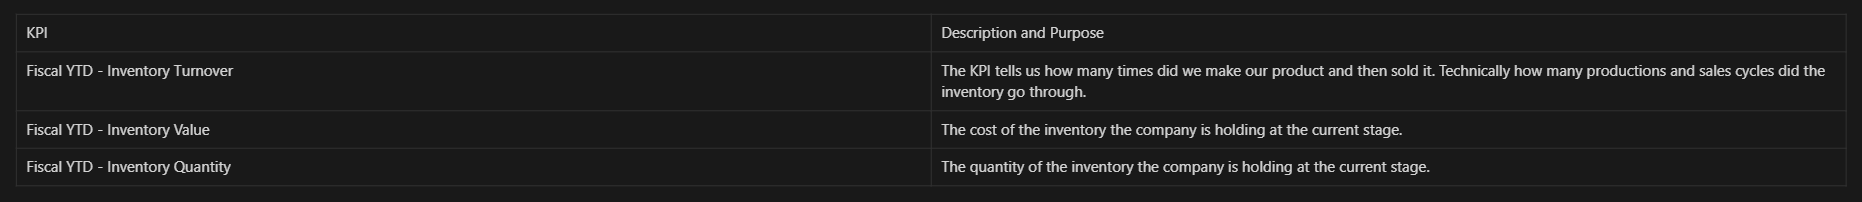 Inventory data overview KPI